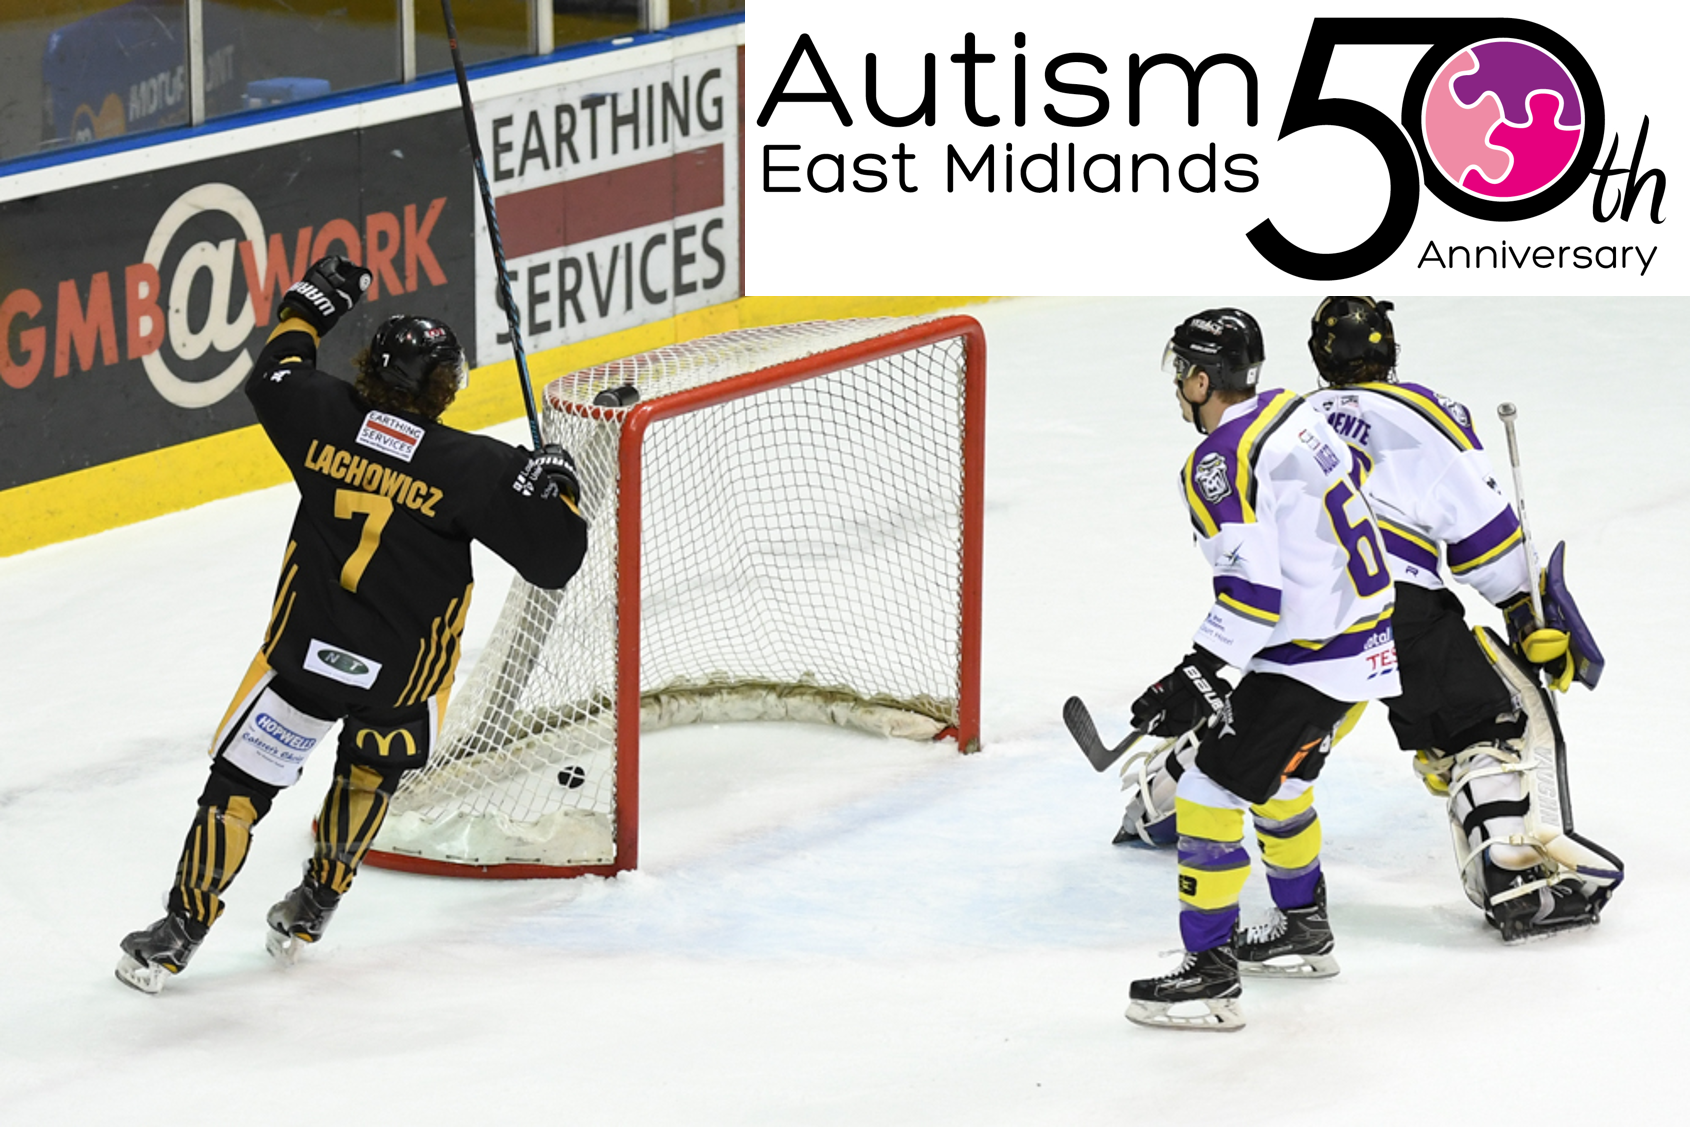 Panthers and Autism East Midlands Top Image